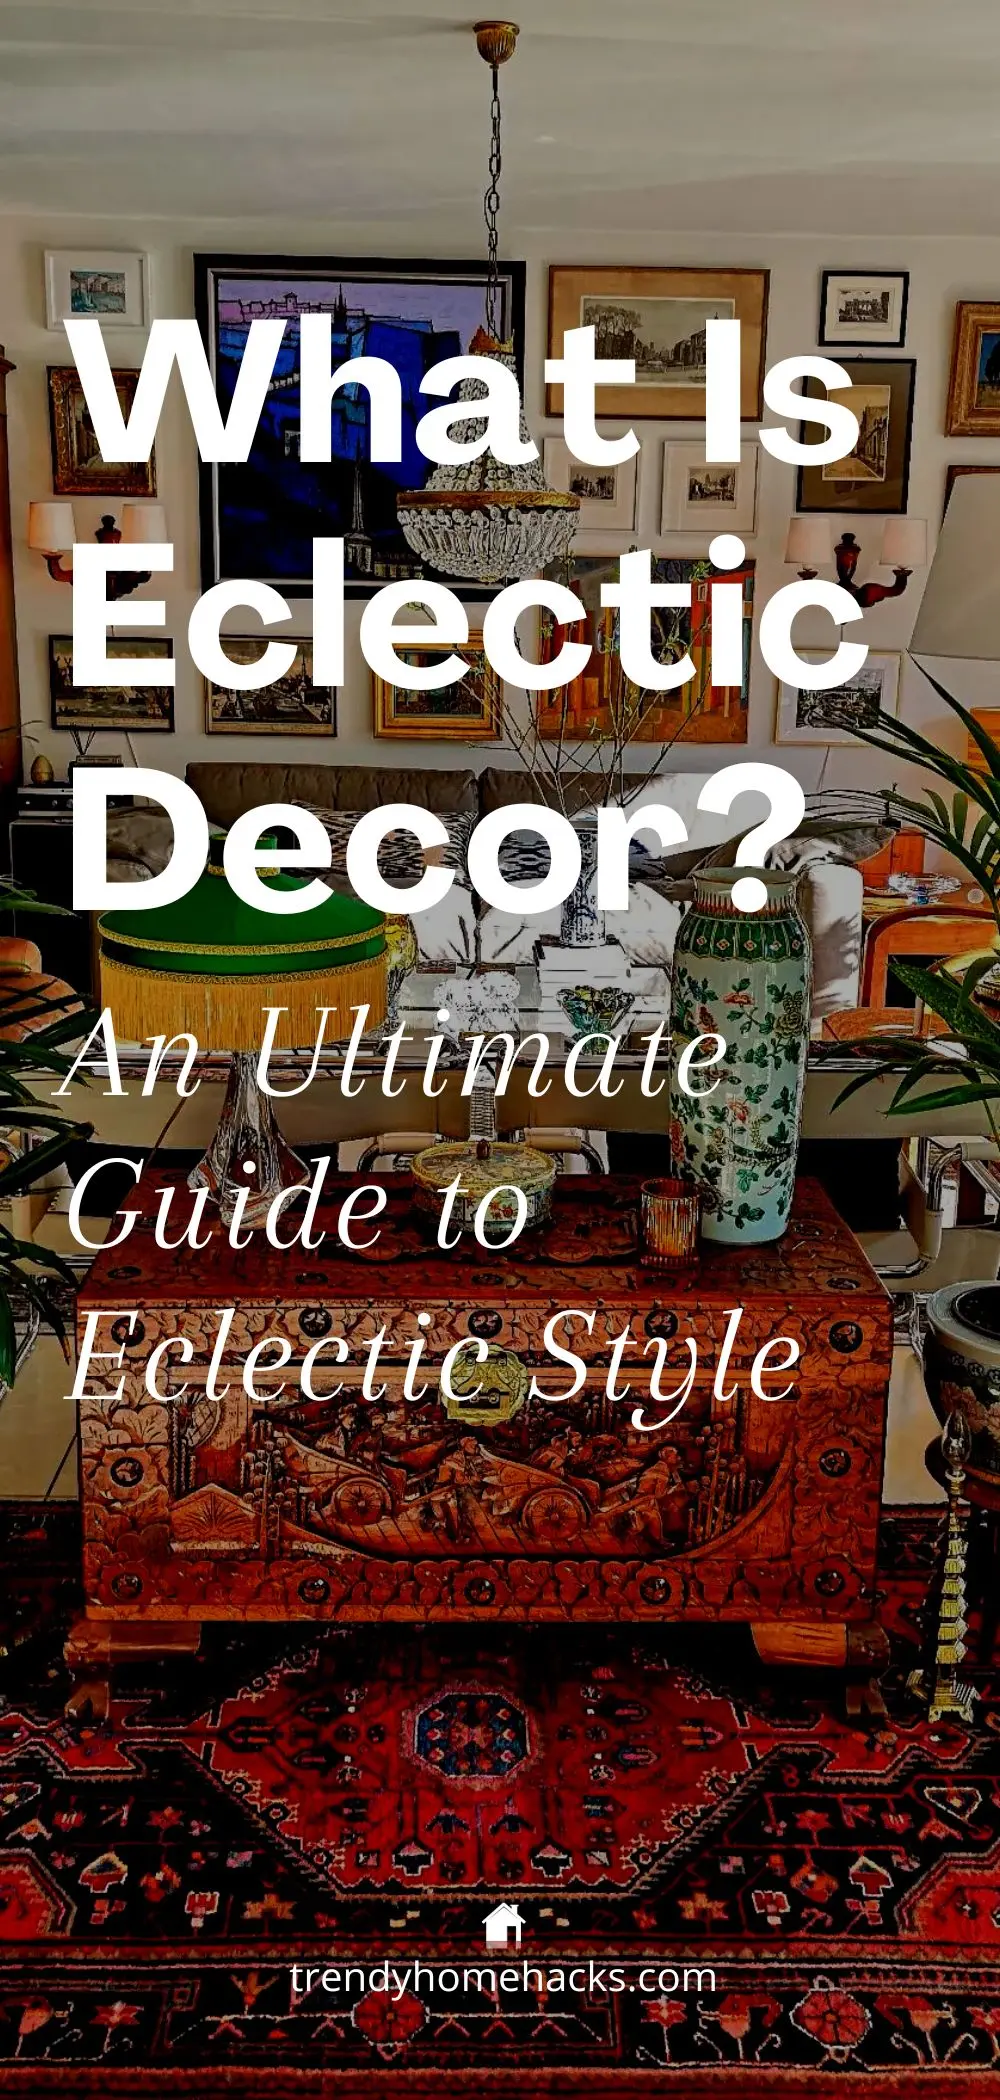 a pinterest pin image with the text overlay "What is Eclectic Decor? An Ultimate Guide to Eclectic Style".